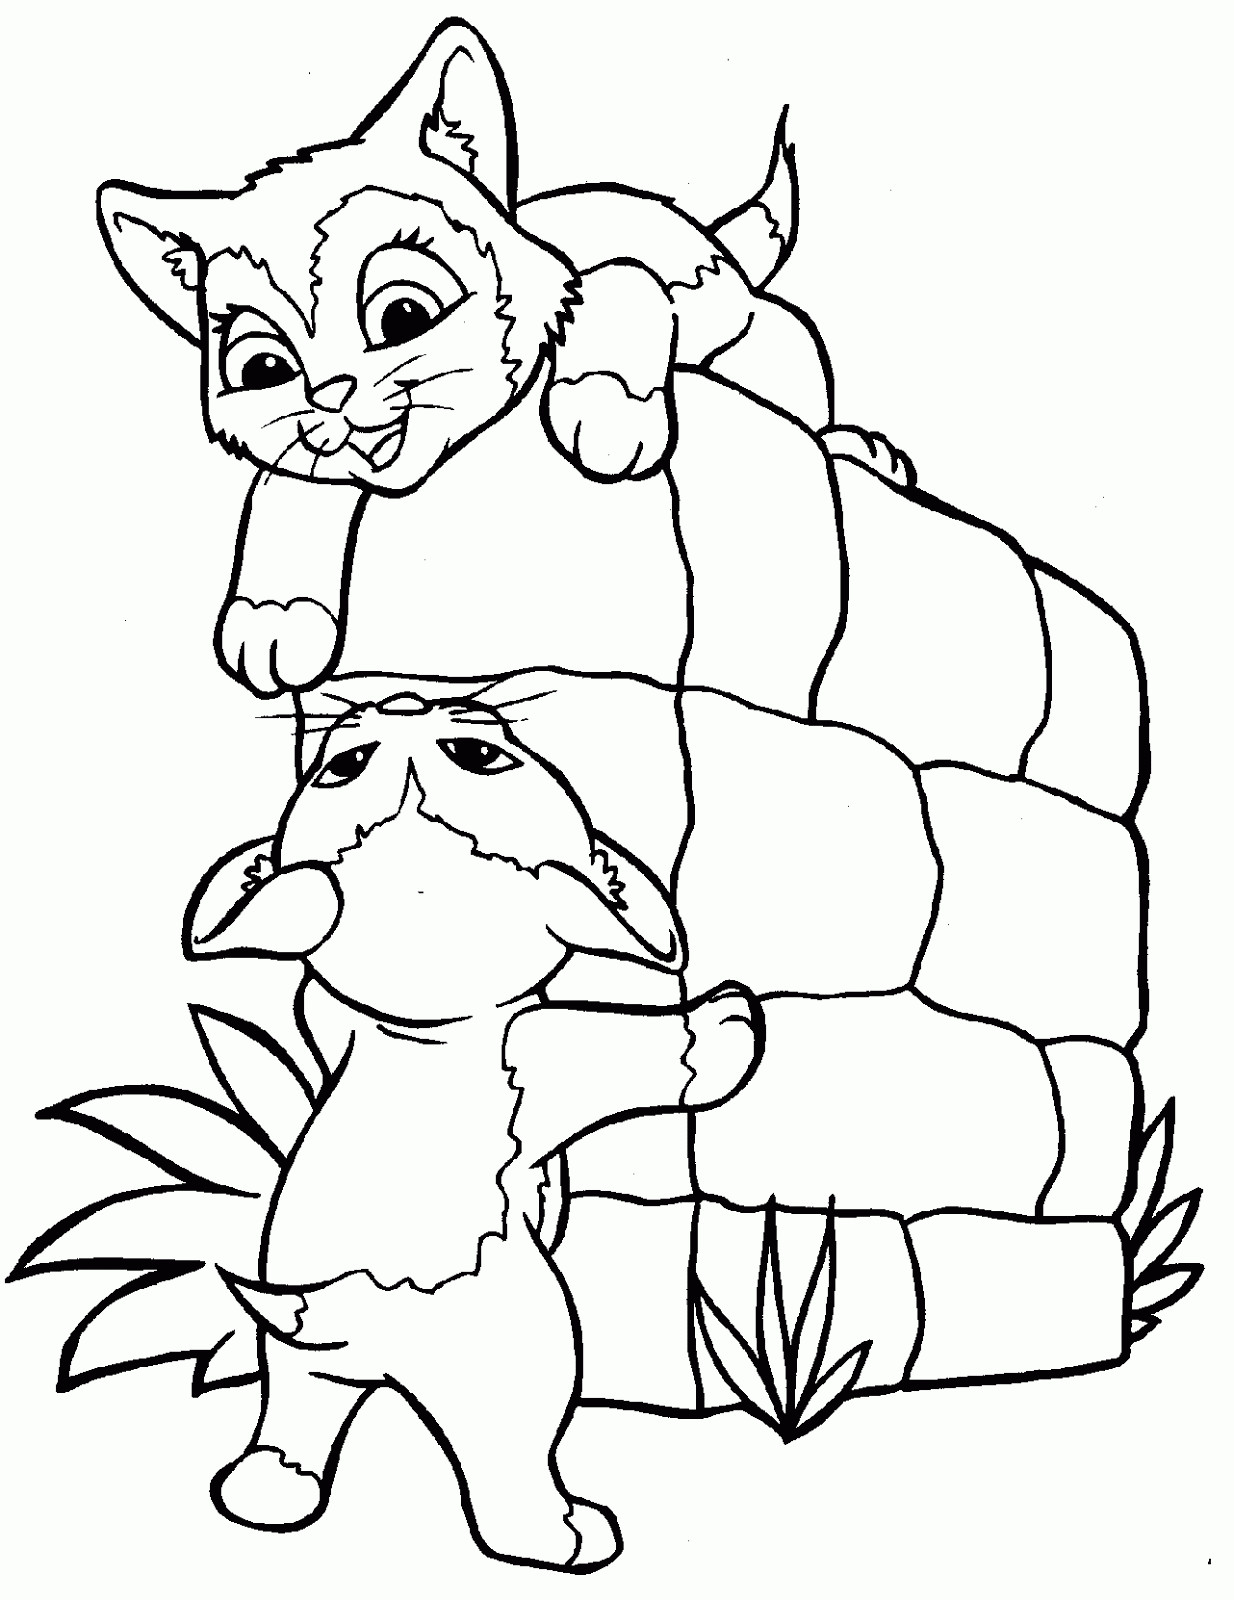 Cat Boy Coloring Pages
 Male Kitten Coloring Pages For Boys